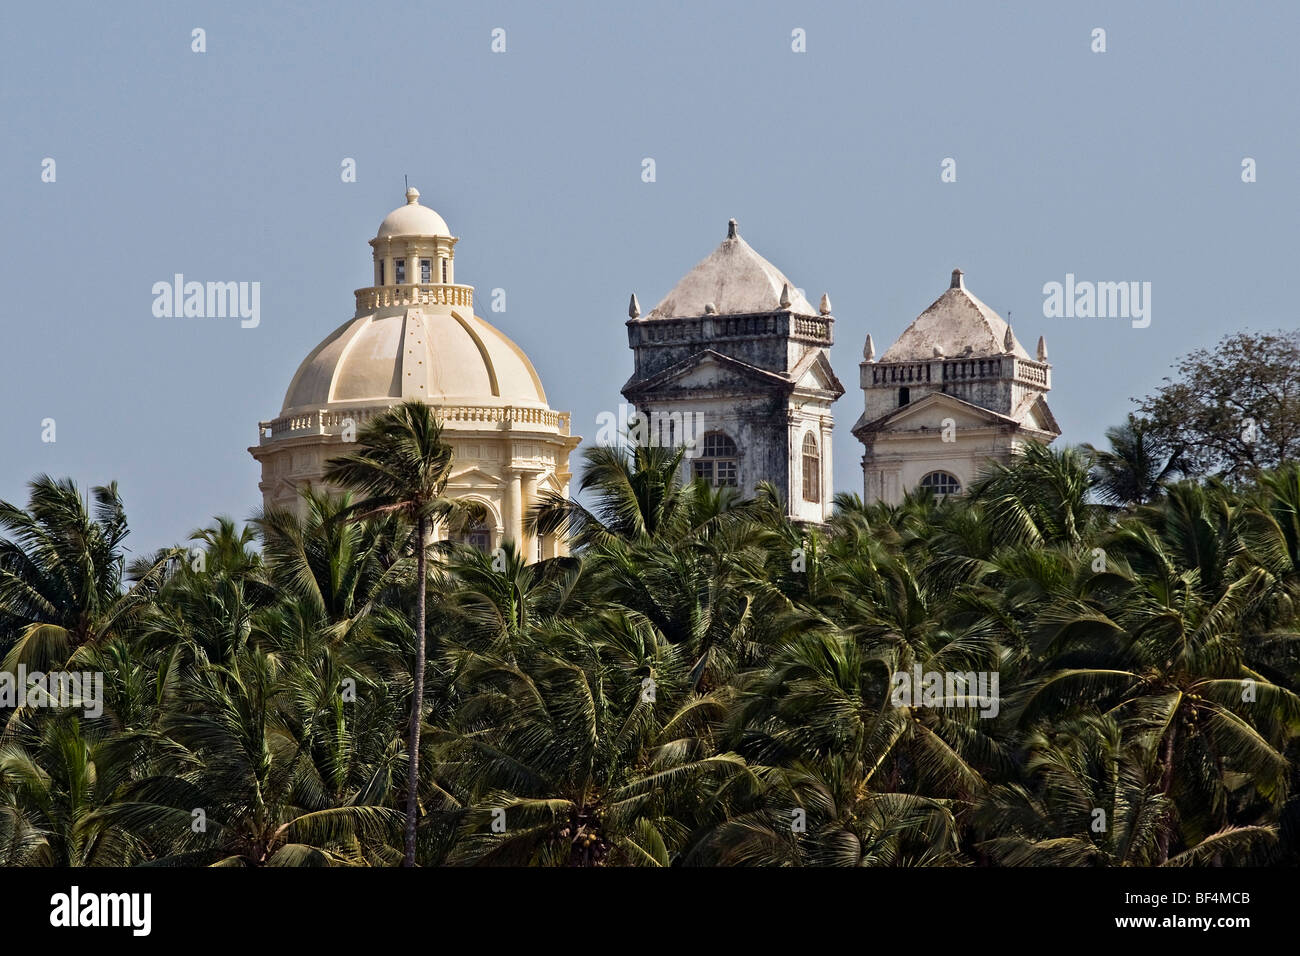 View of the dome and the towers of the Church of St. Cajetan, Old Goa, Velha Goa, India, Asia Stock Photo